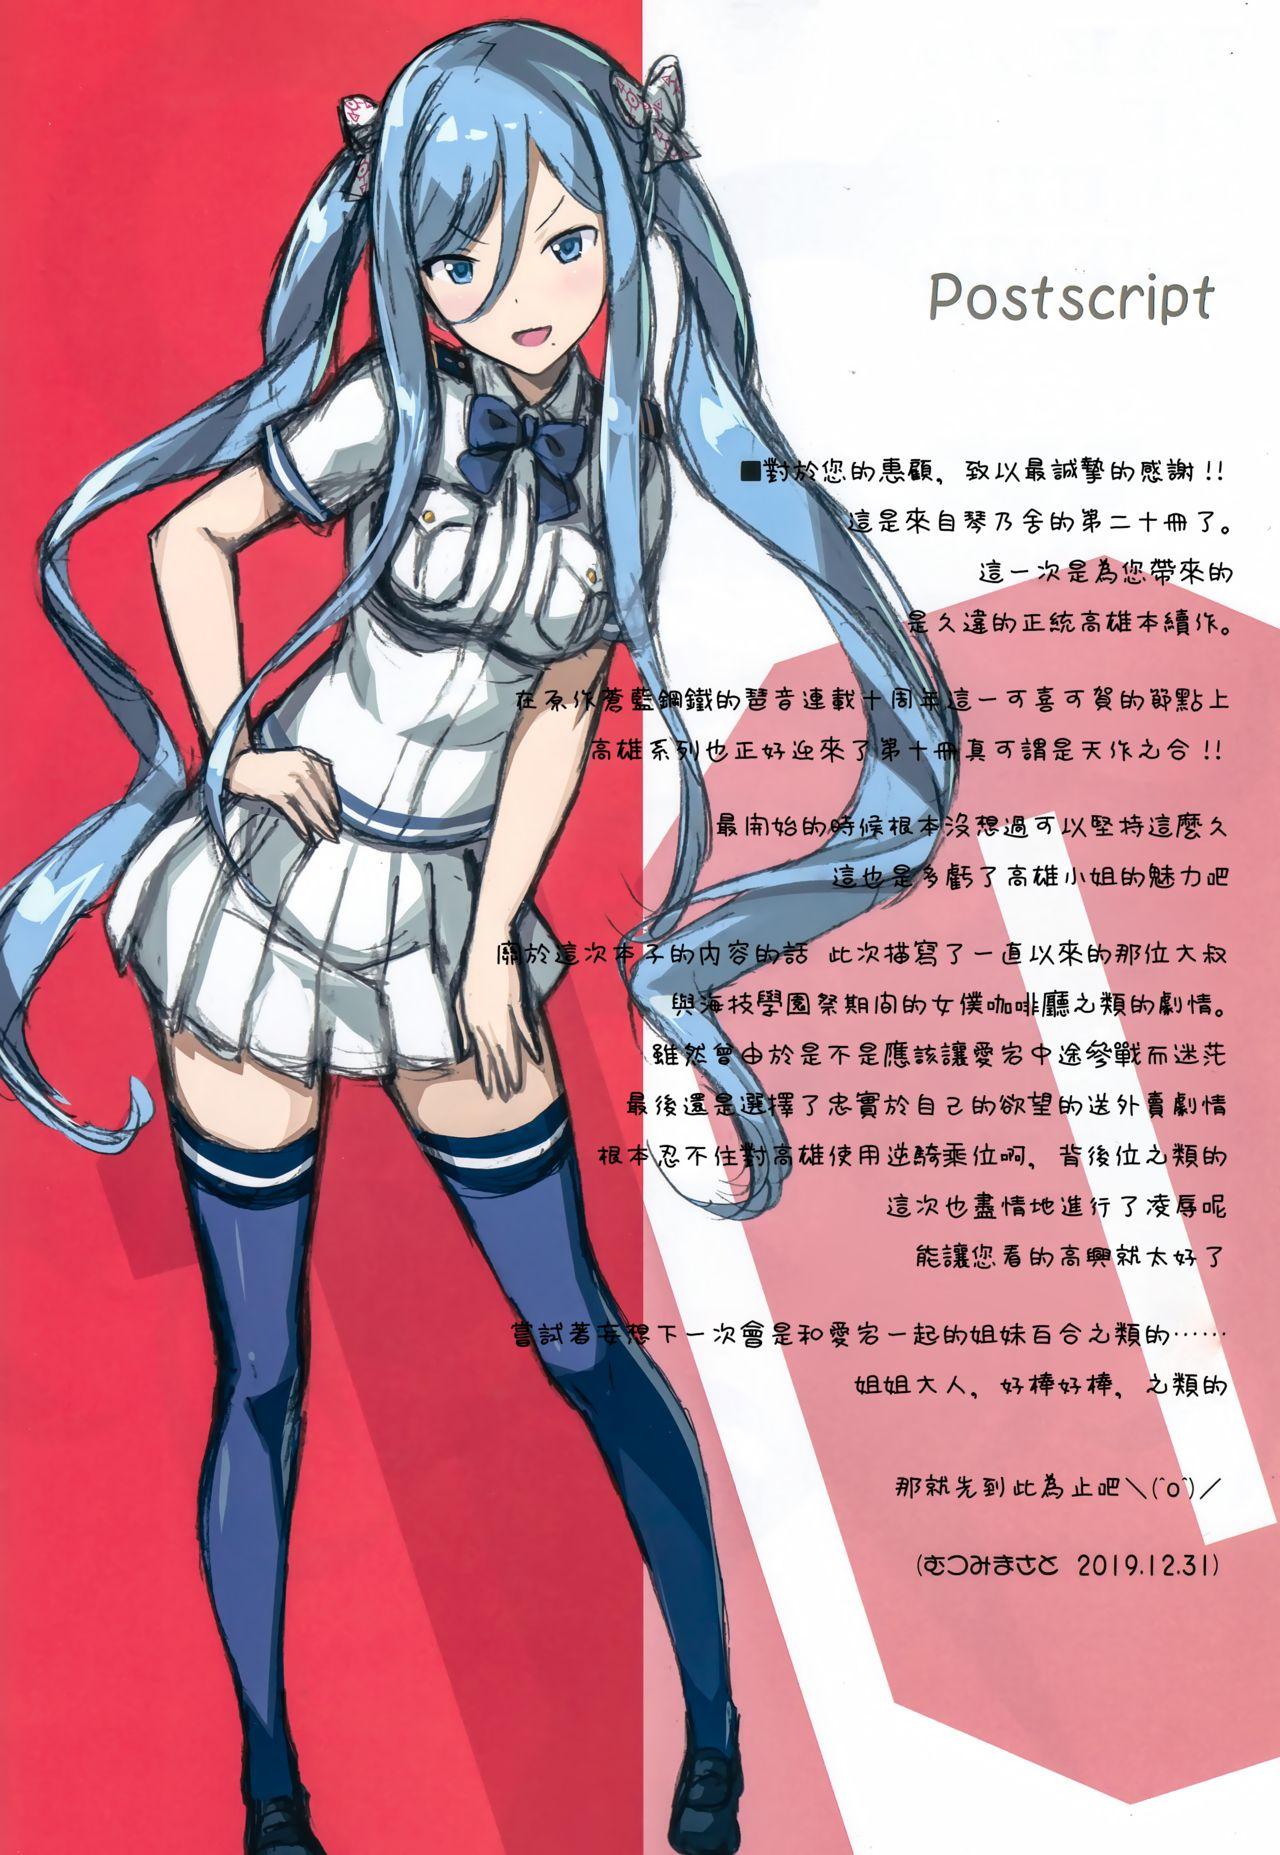 Hardcore TAKAO OF BLUE STEEL 10 - Arpeggio of blue steel Gay Outdoor - Page 4